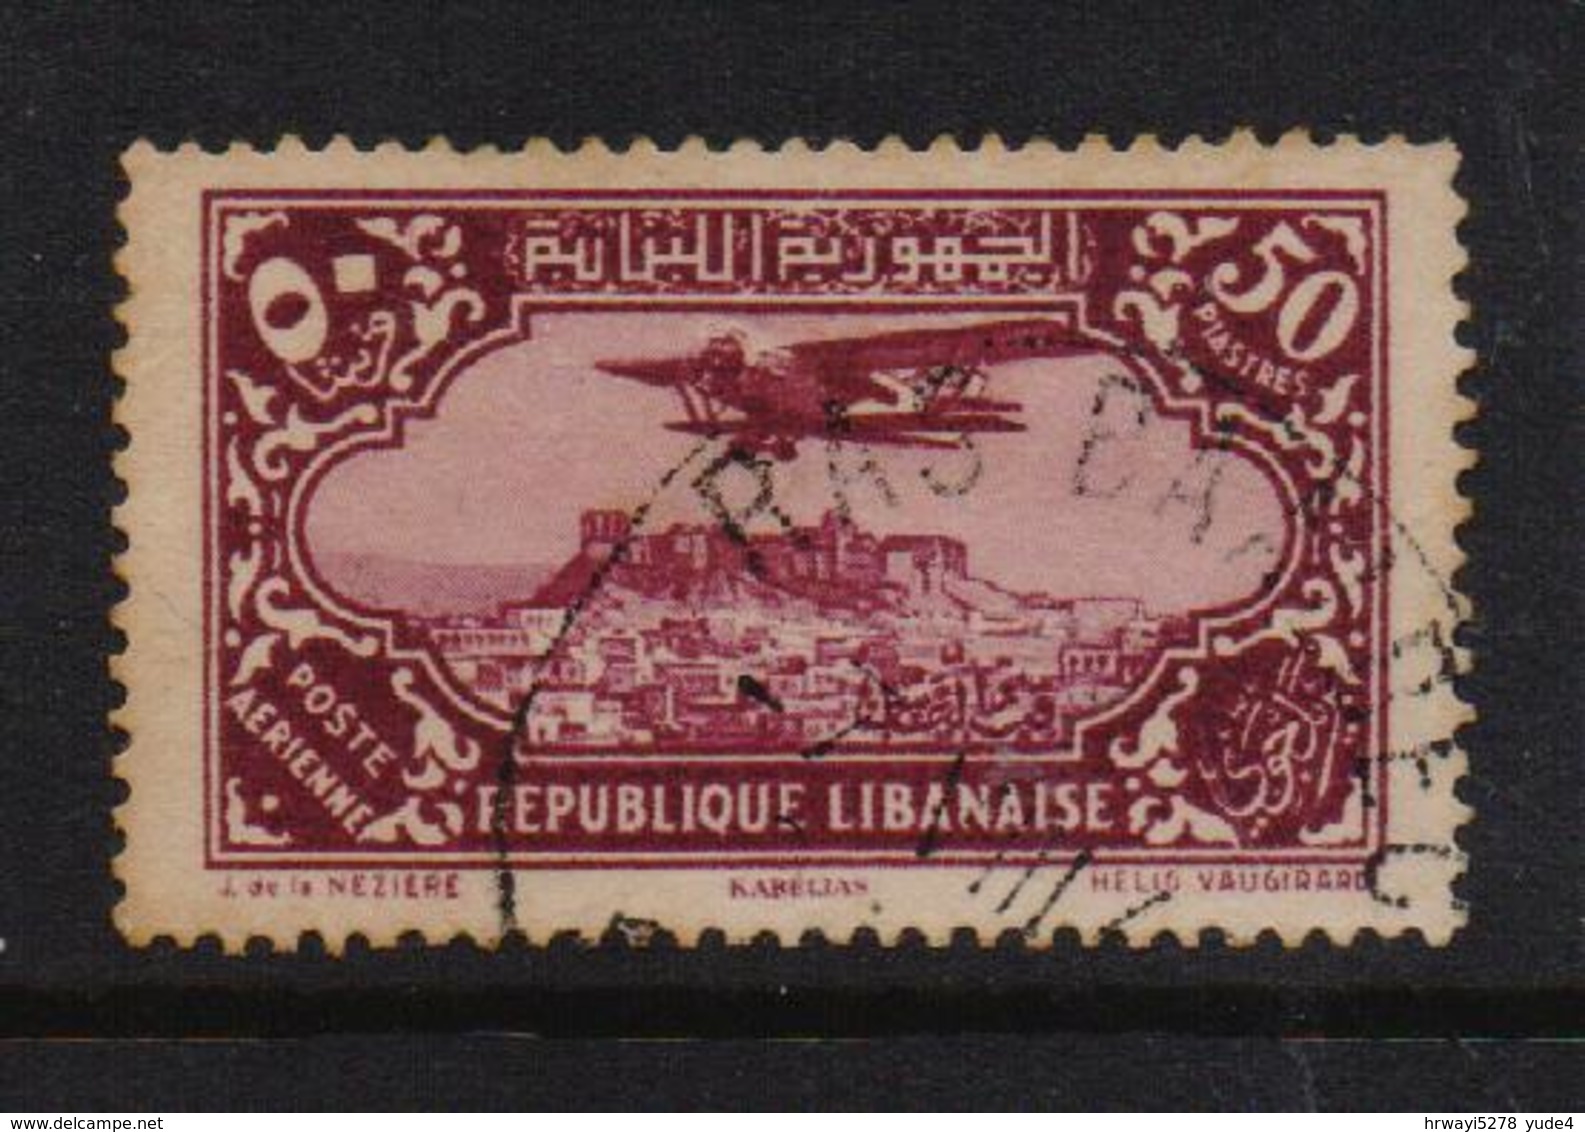 French Lebanon 1930, Airplane 50 Piastres, Minr 194, Vfu. Cv 12 Euro But Stamp Is Damaged - Airmail